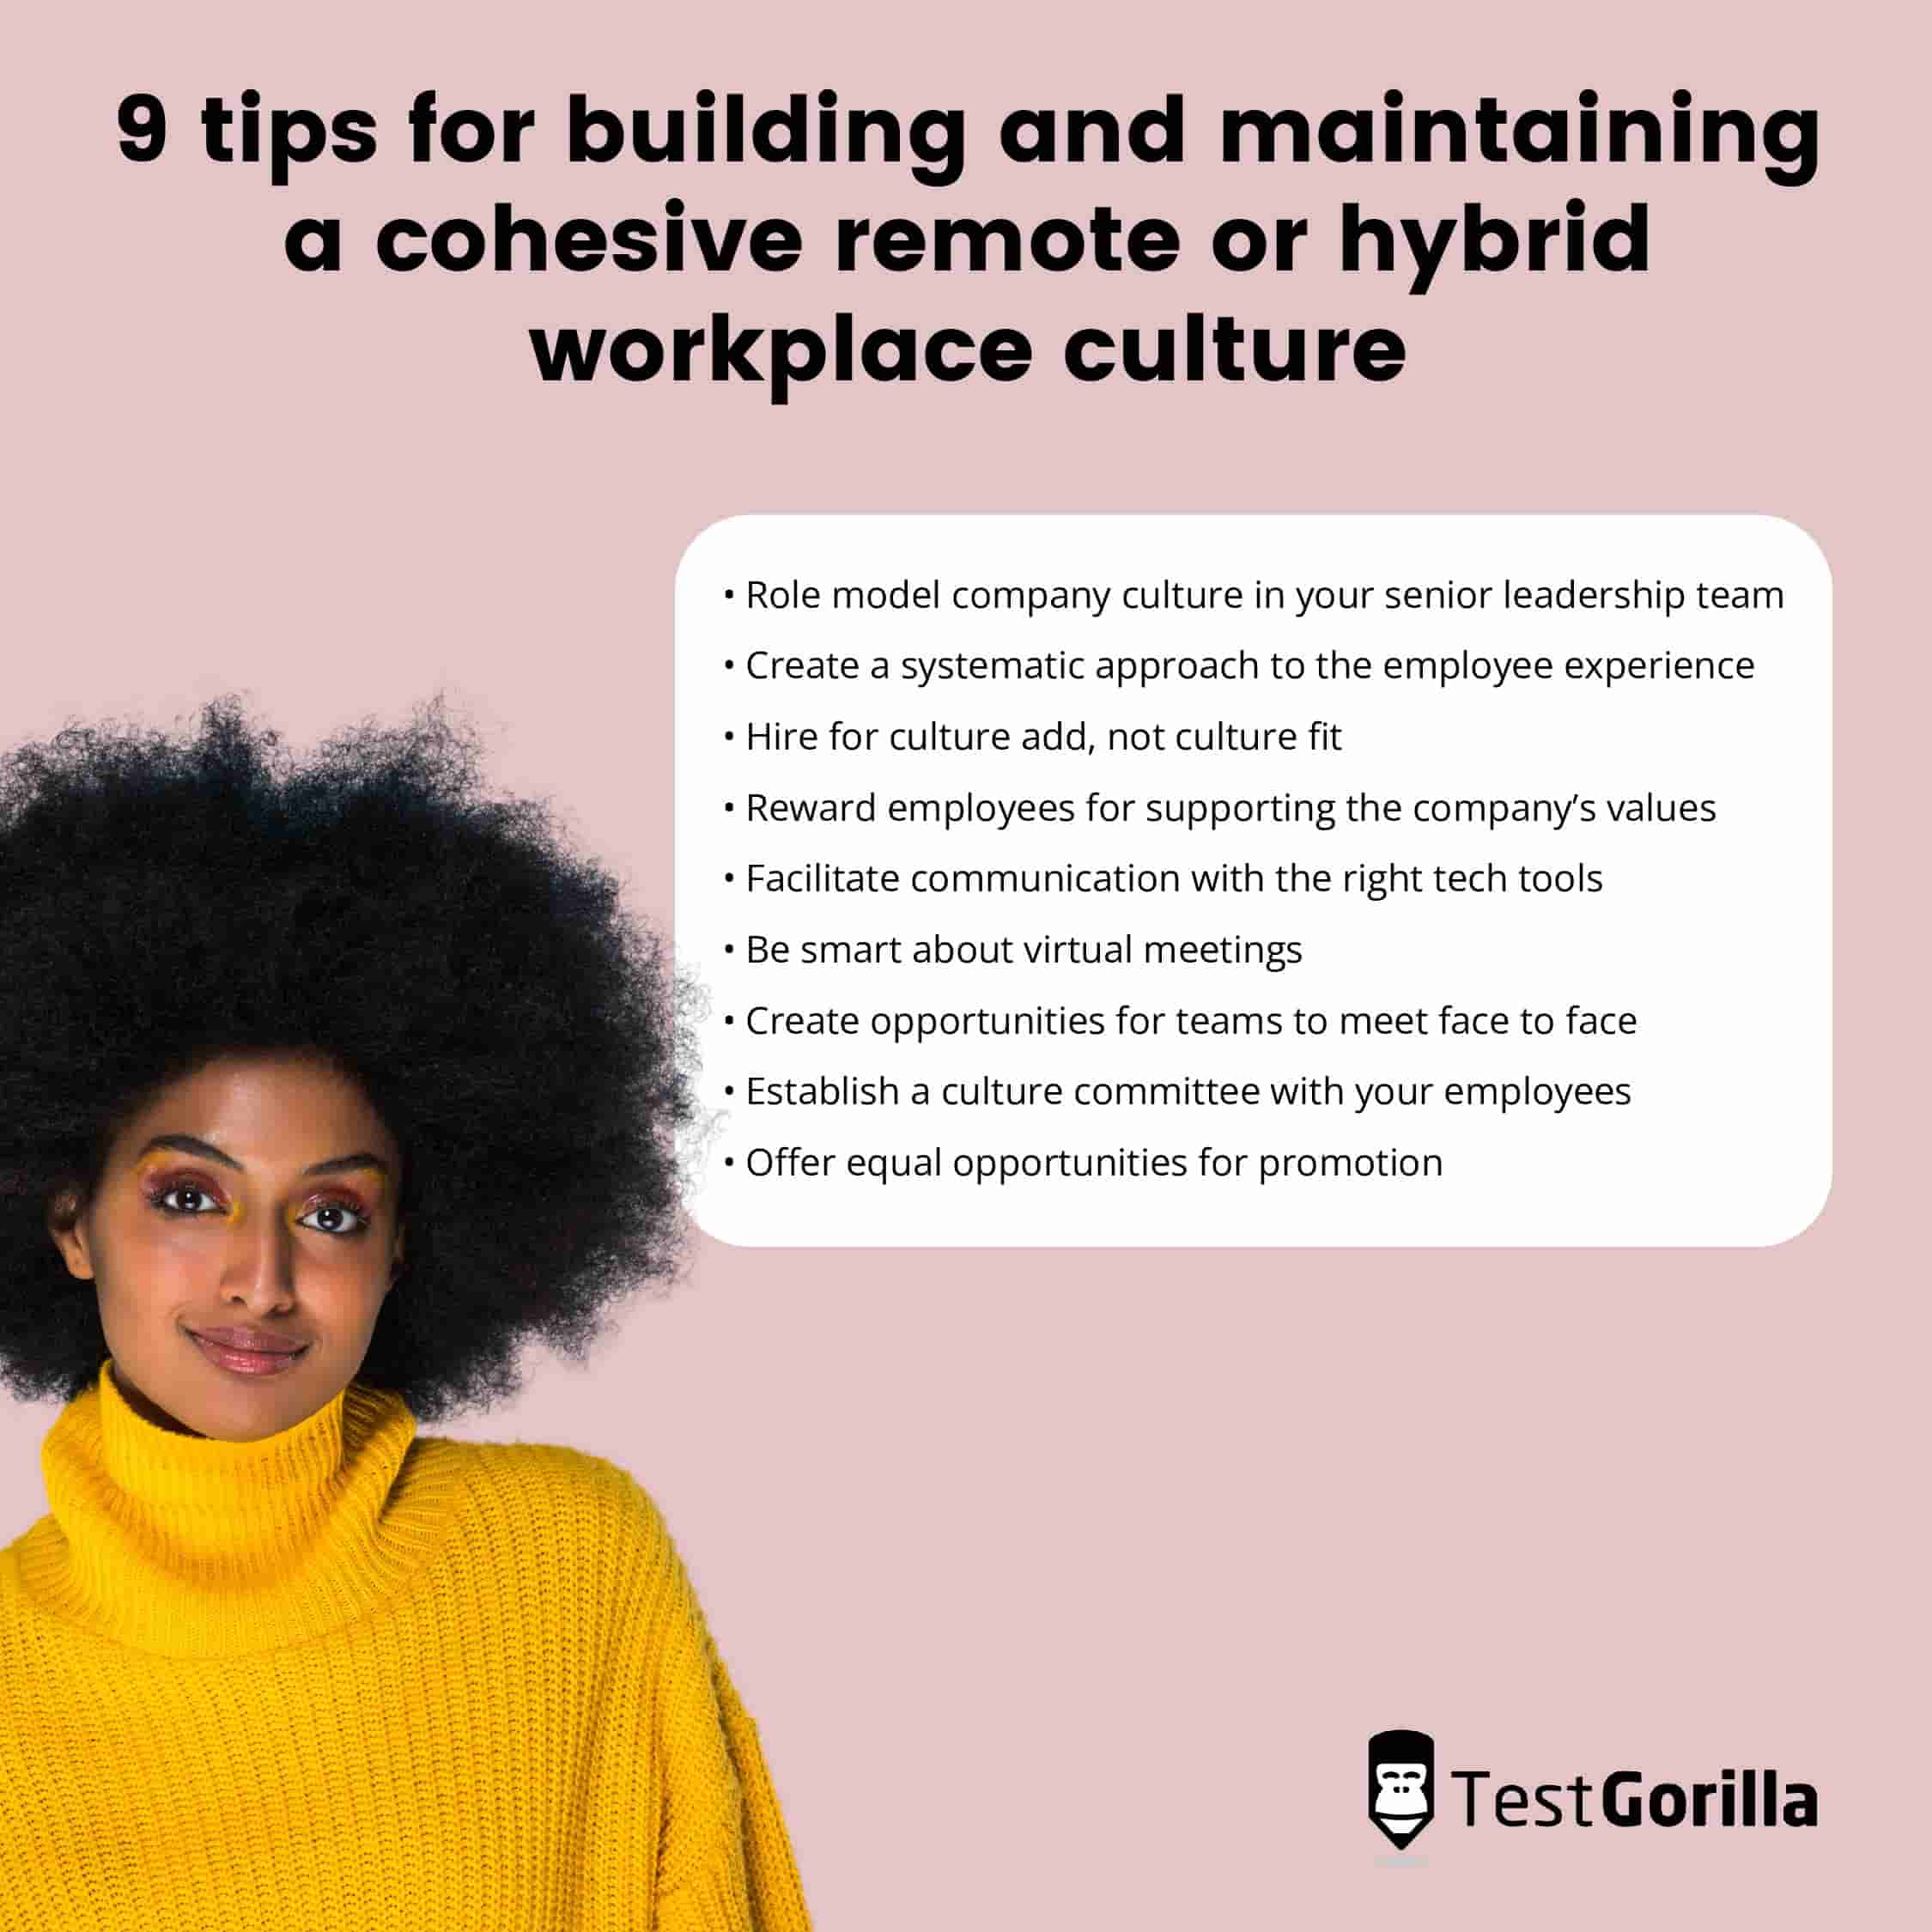 Can you have workplace culture without a traditional workplace?